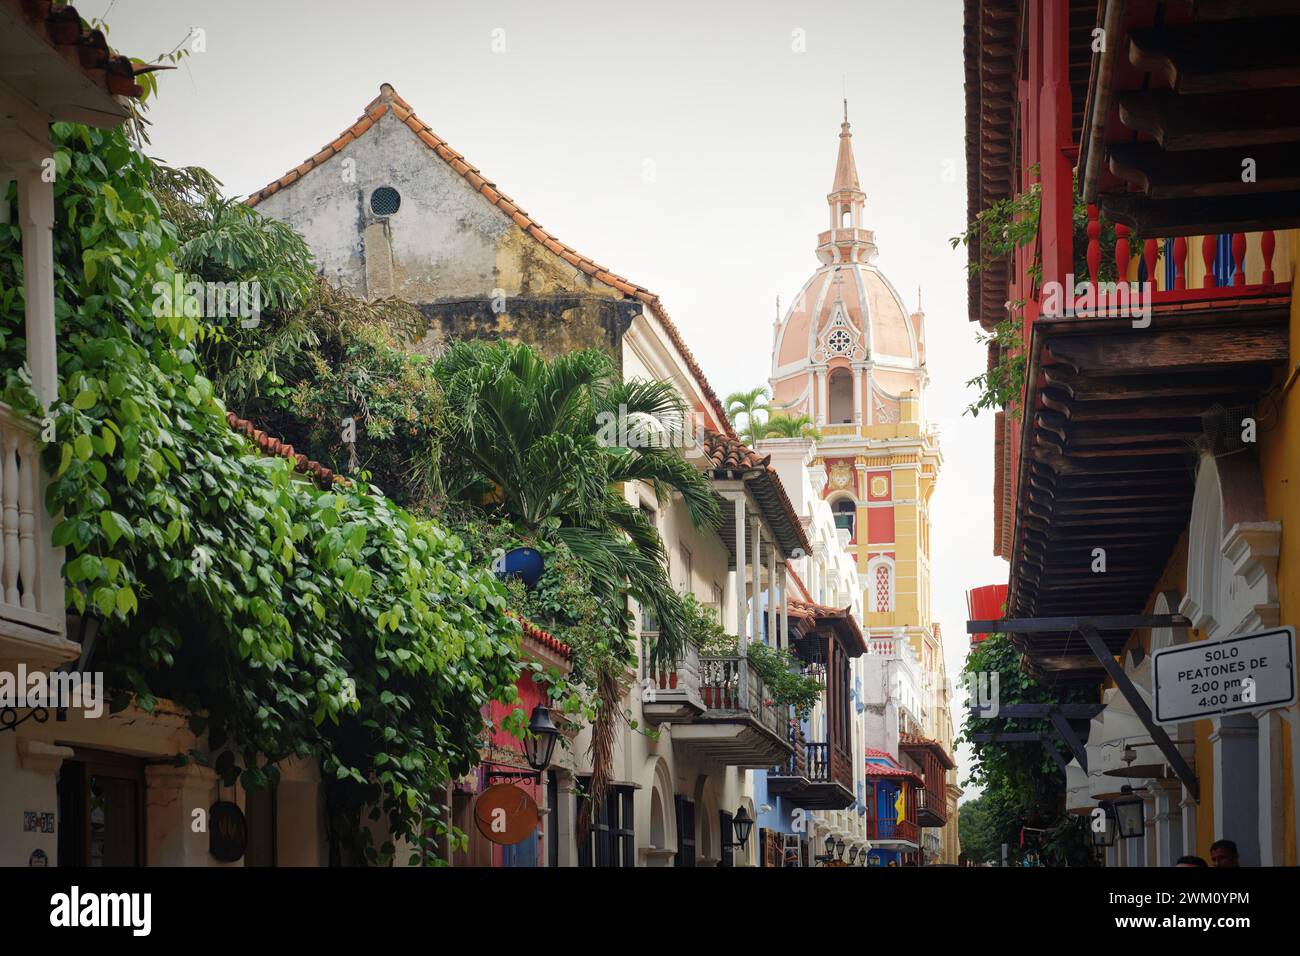 Photo of the old town of the Cartagena da Indias - Colombia Stock Photo